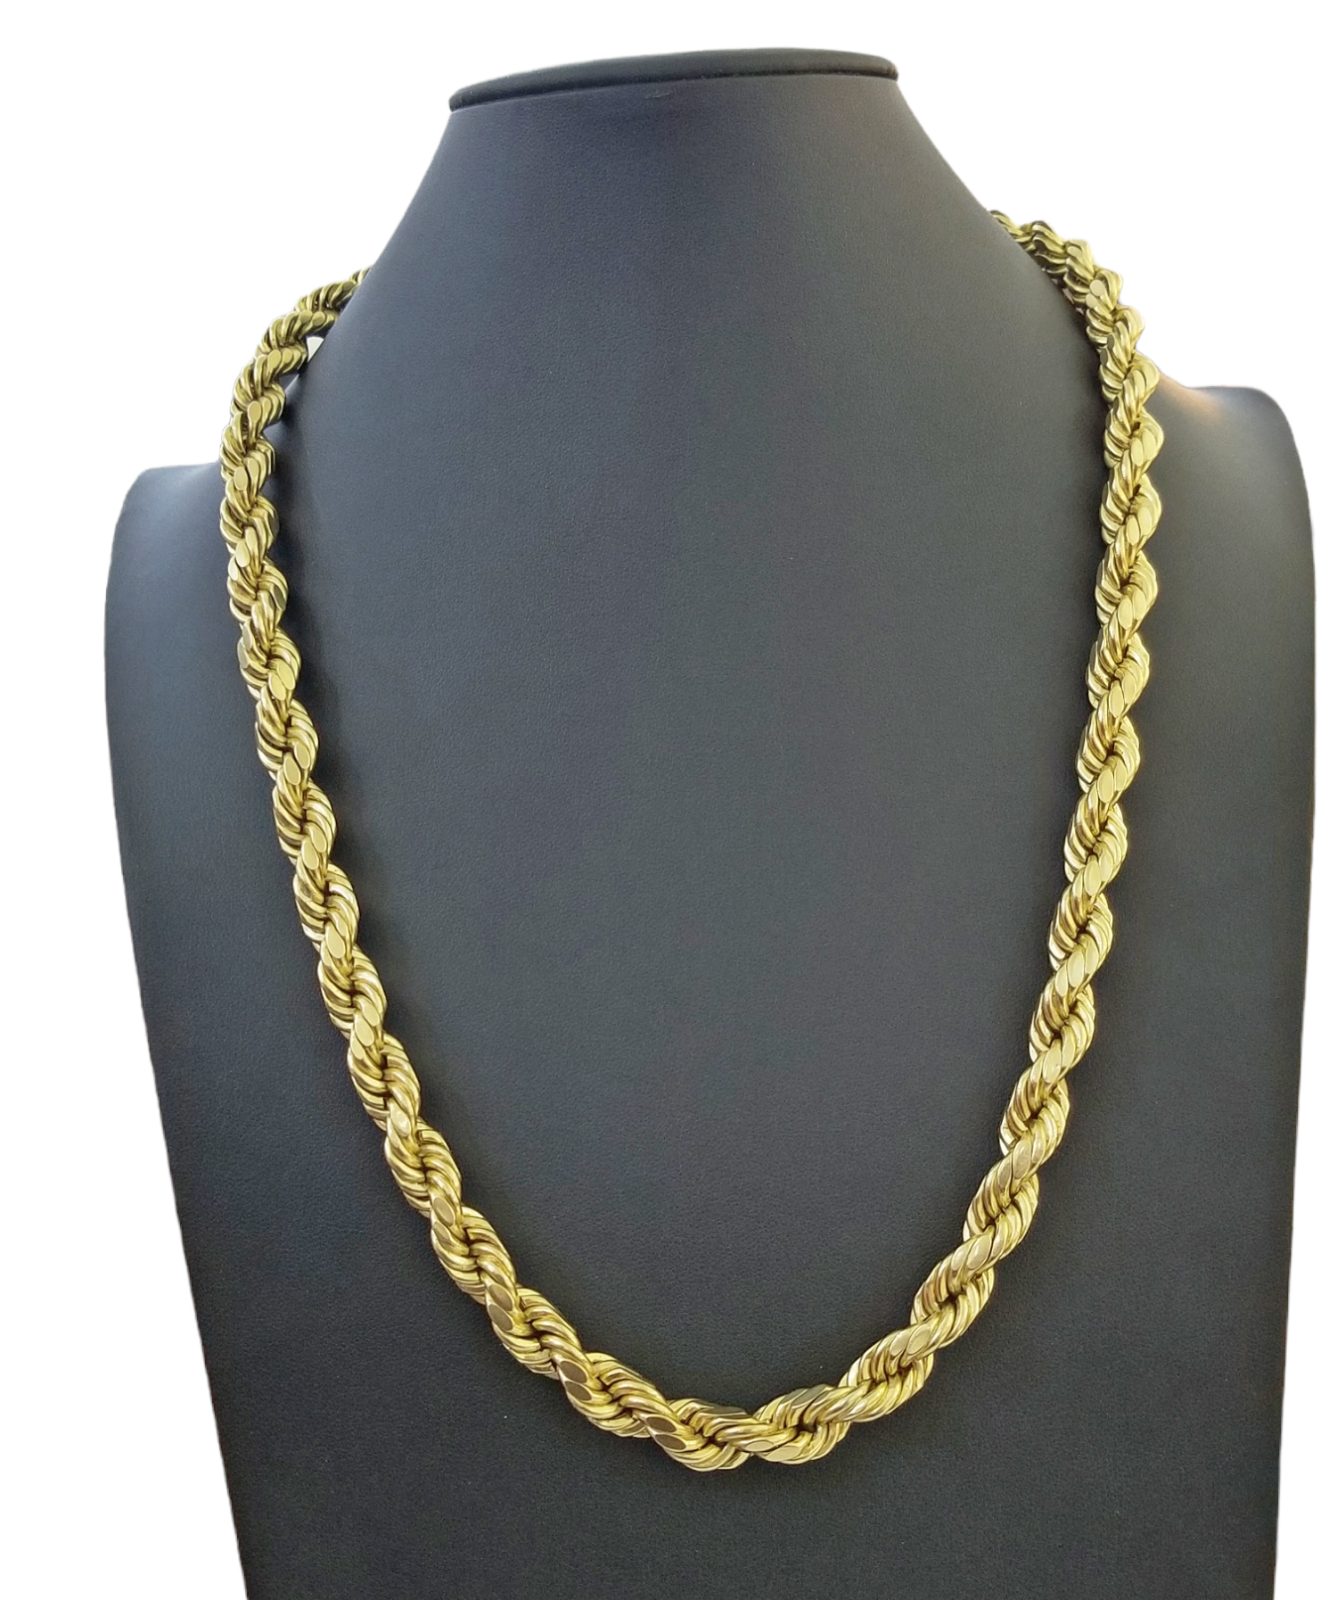 Real 10K Yellow Gold Rope Chain Necklace 26 Inch 3mm- 10mm Real 10k Men Women